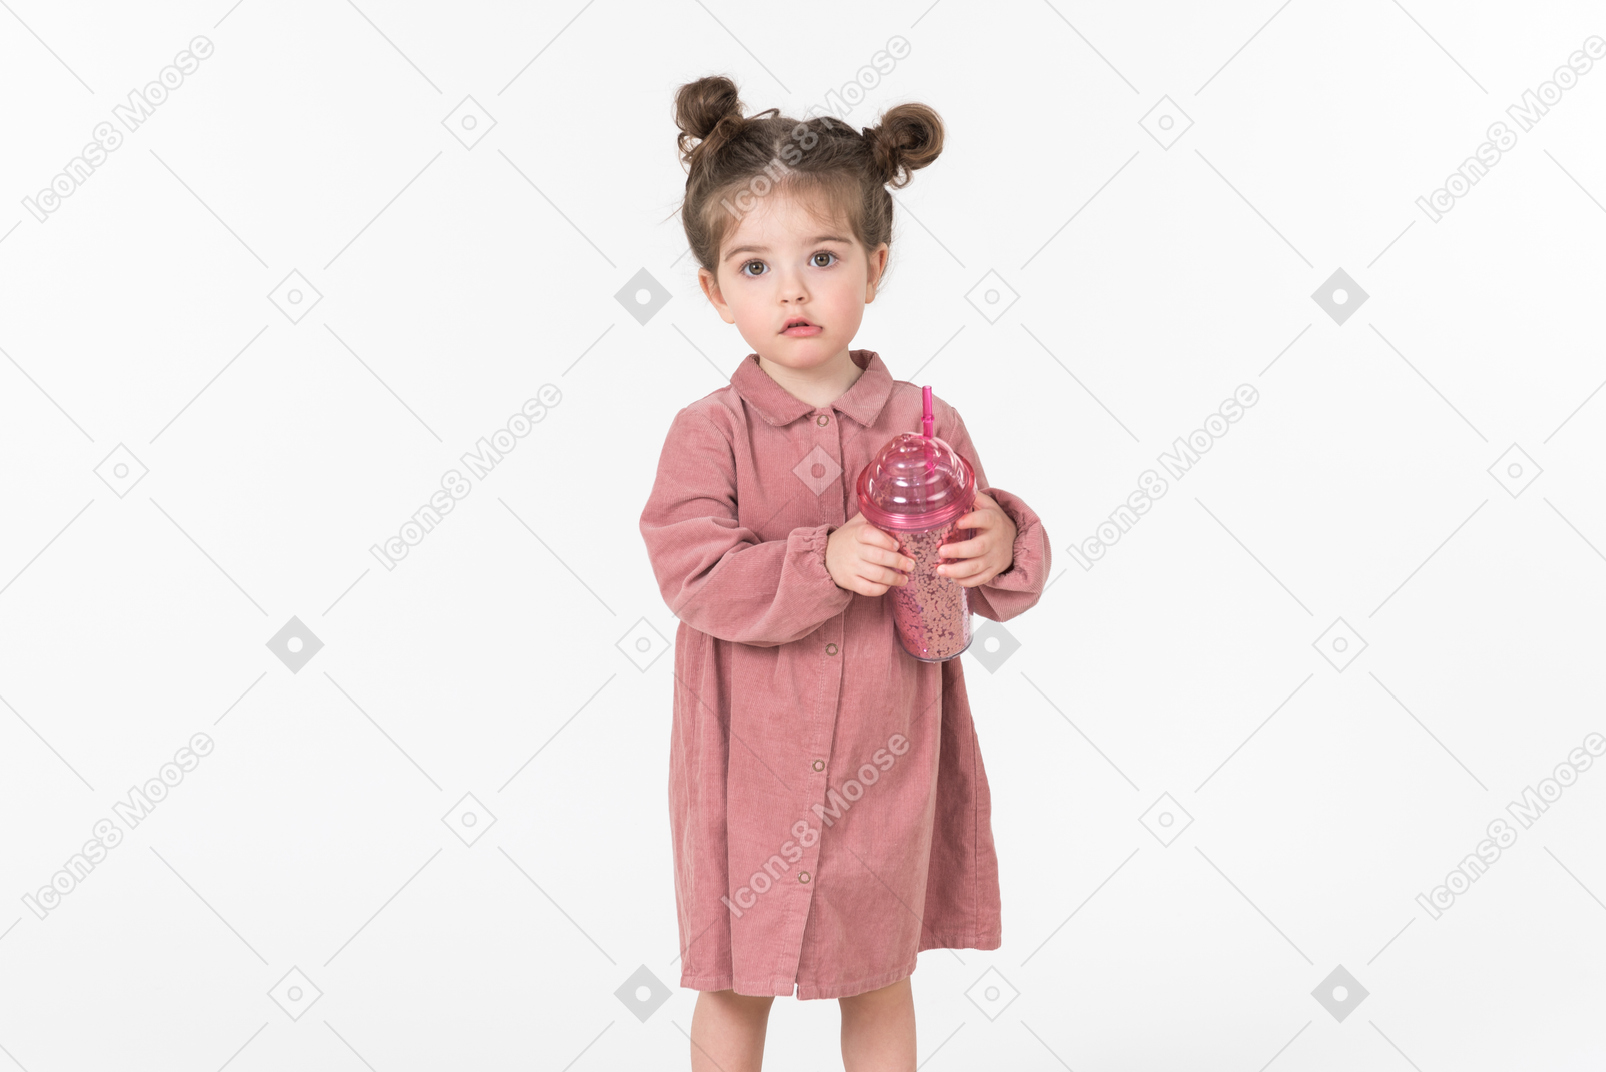 Little kid girl holding plastic cup